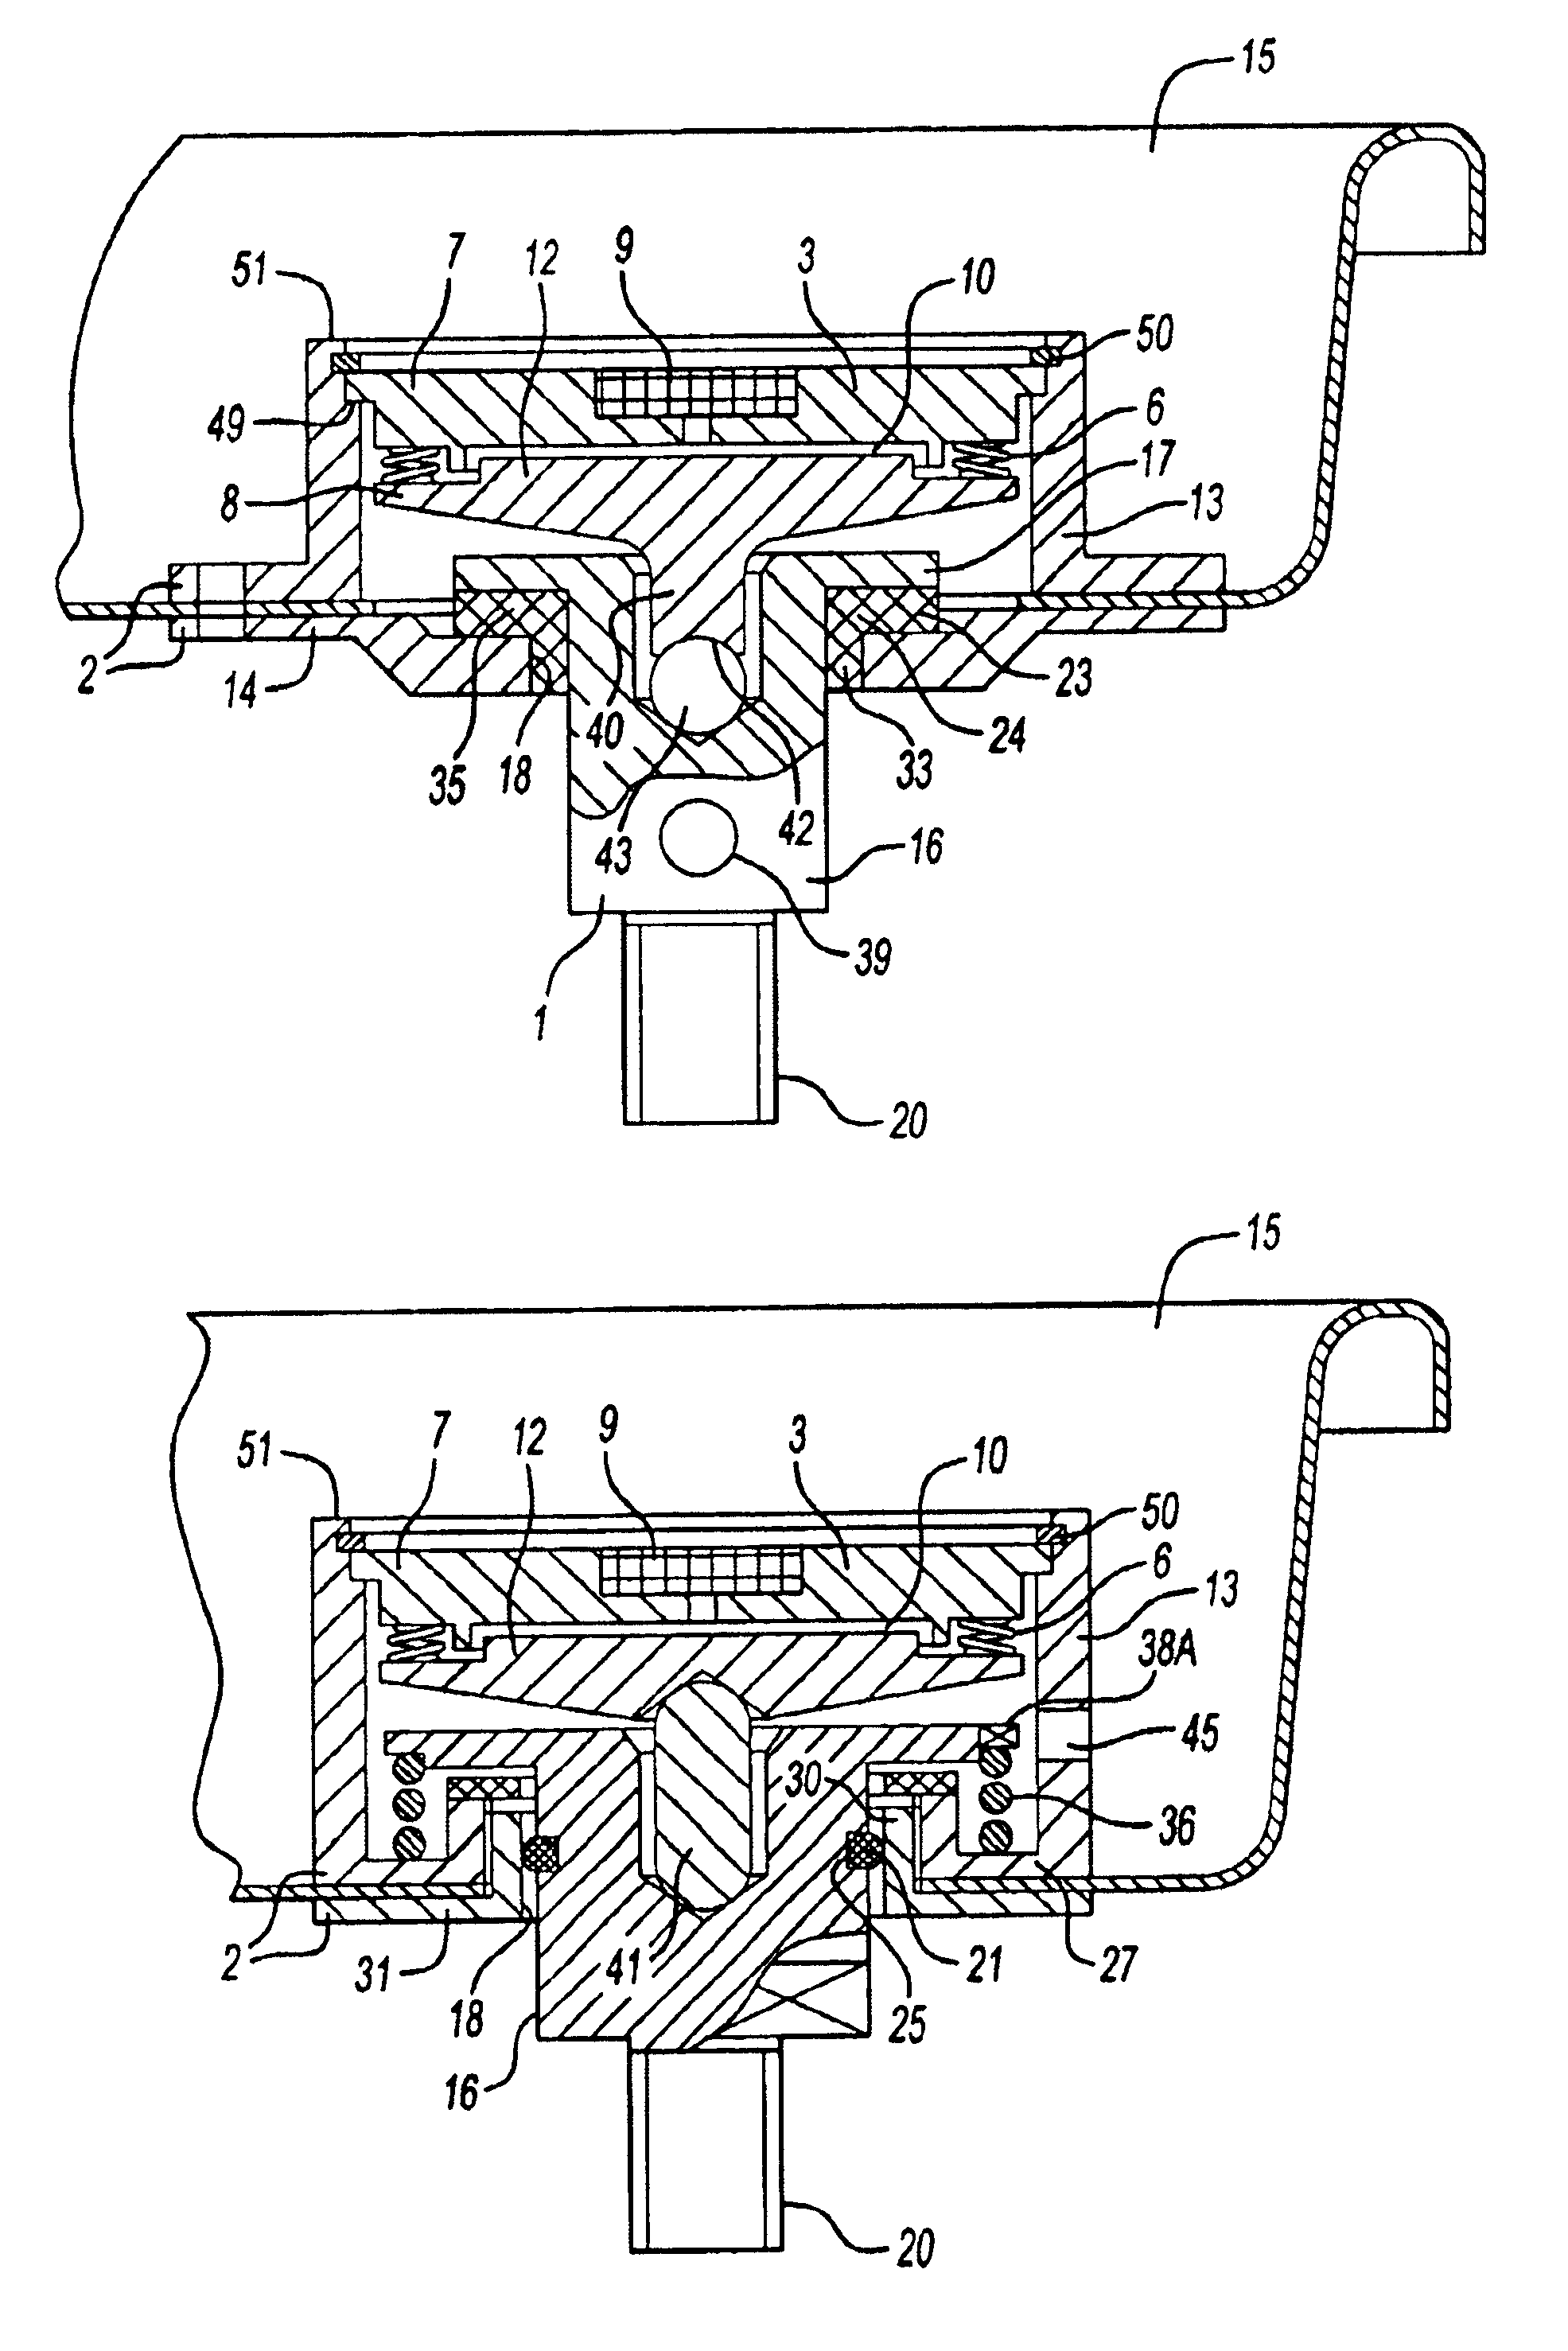 Load cell including angular and lateral decoupling